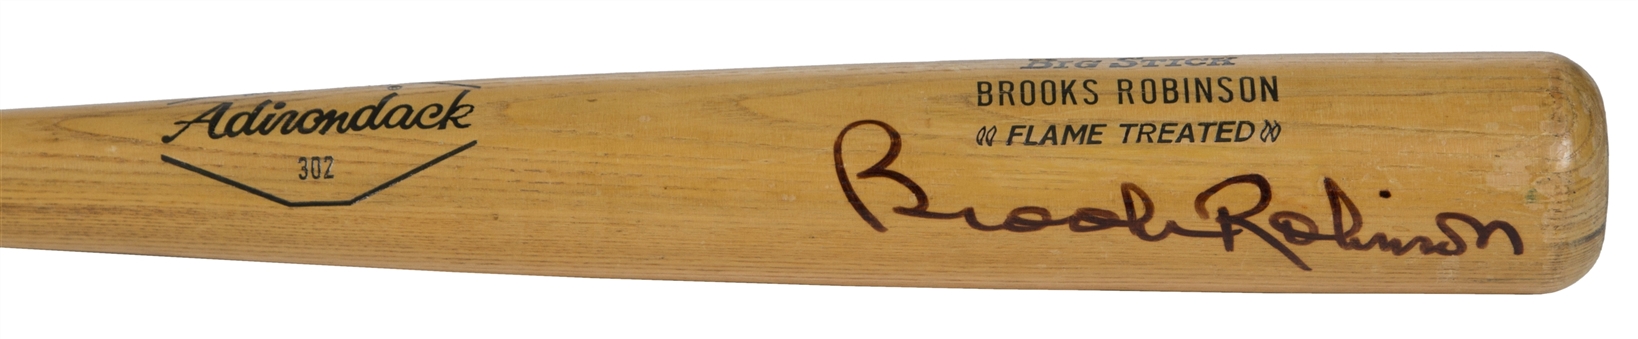 1971-1977 Brooks Robinson Game Used and Signed Bat  PSA/DNA GU 8.5